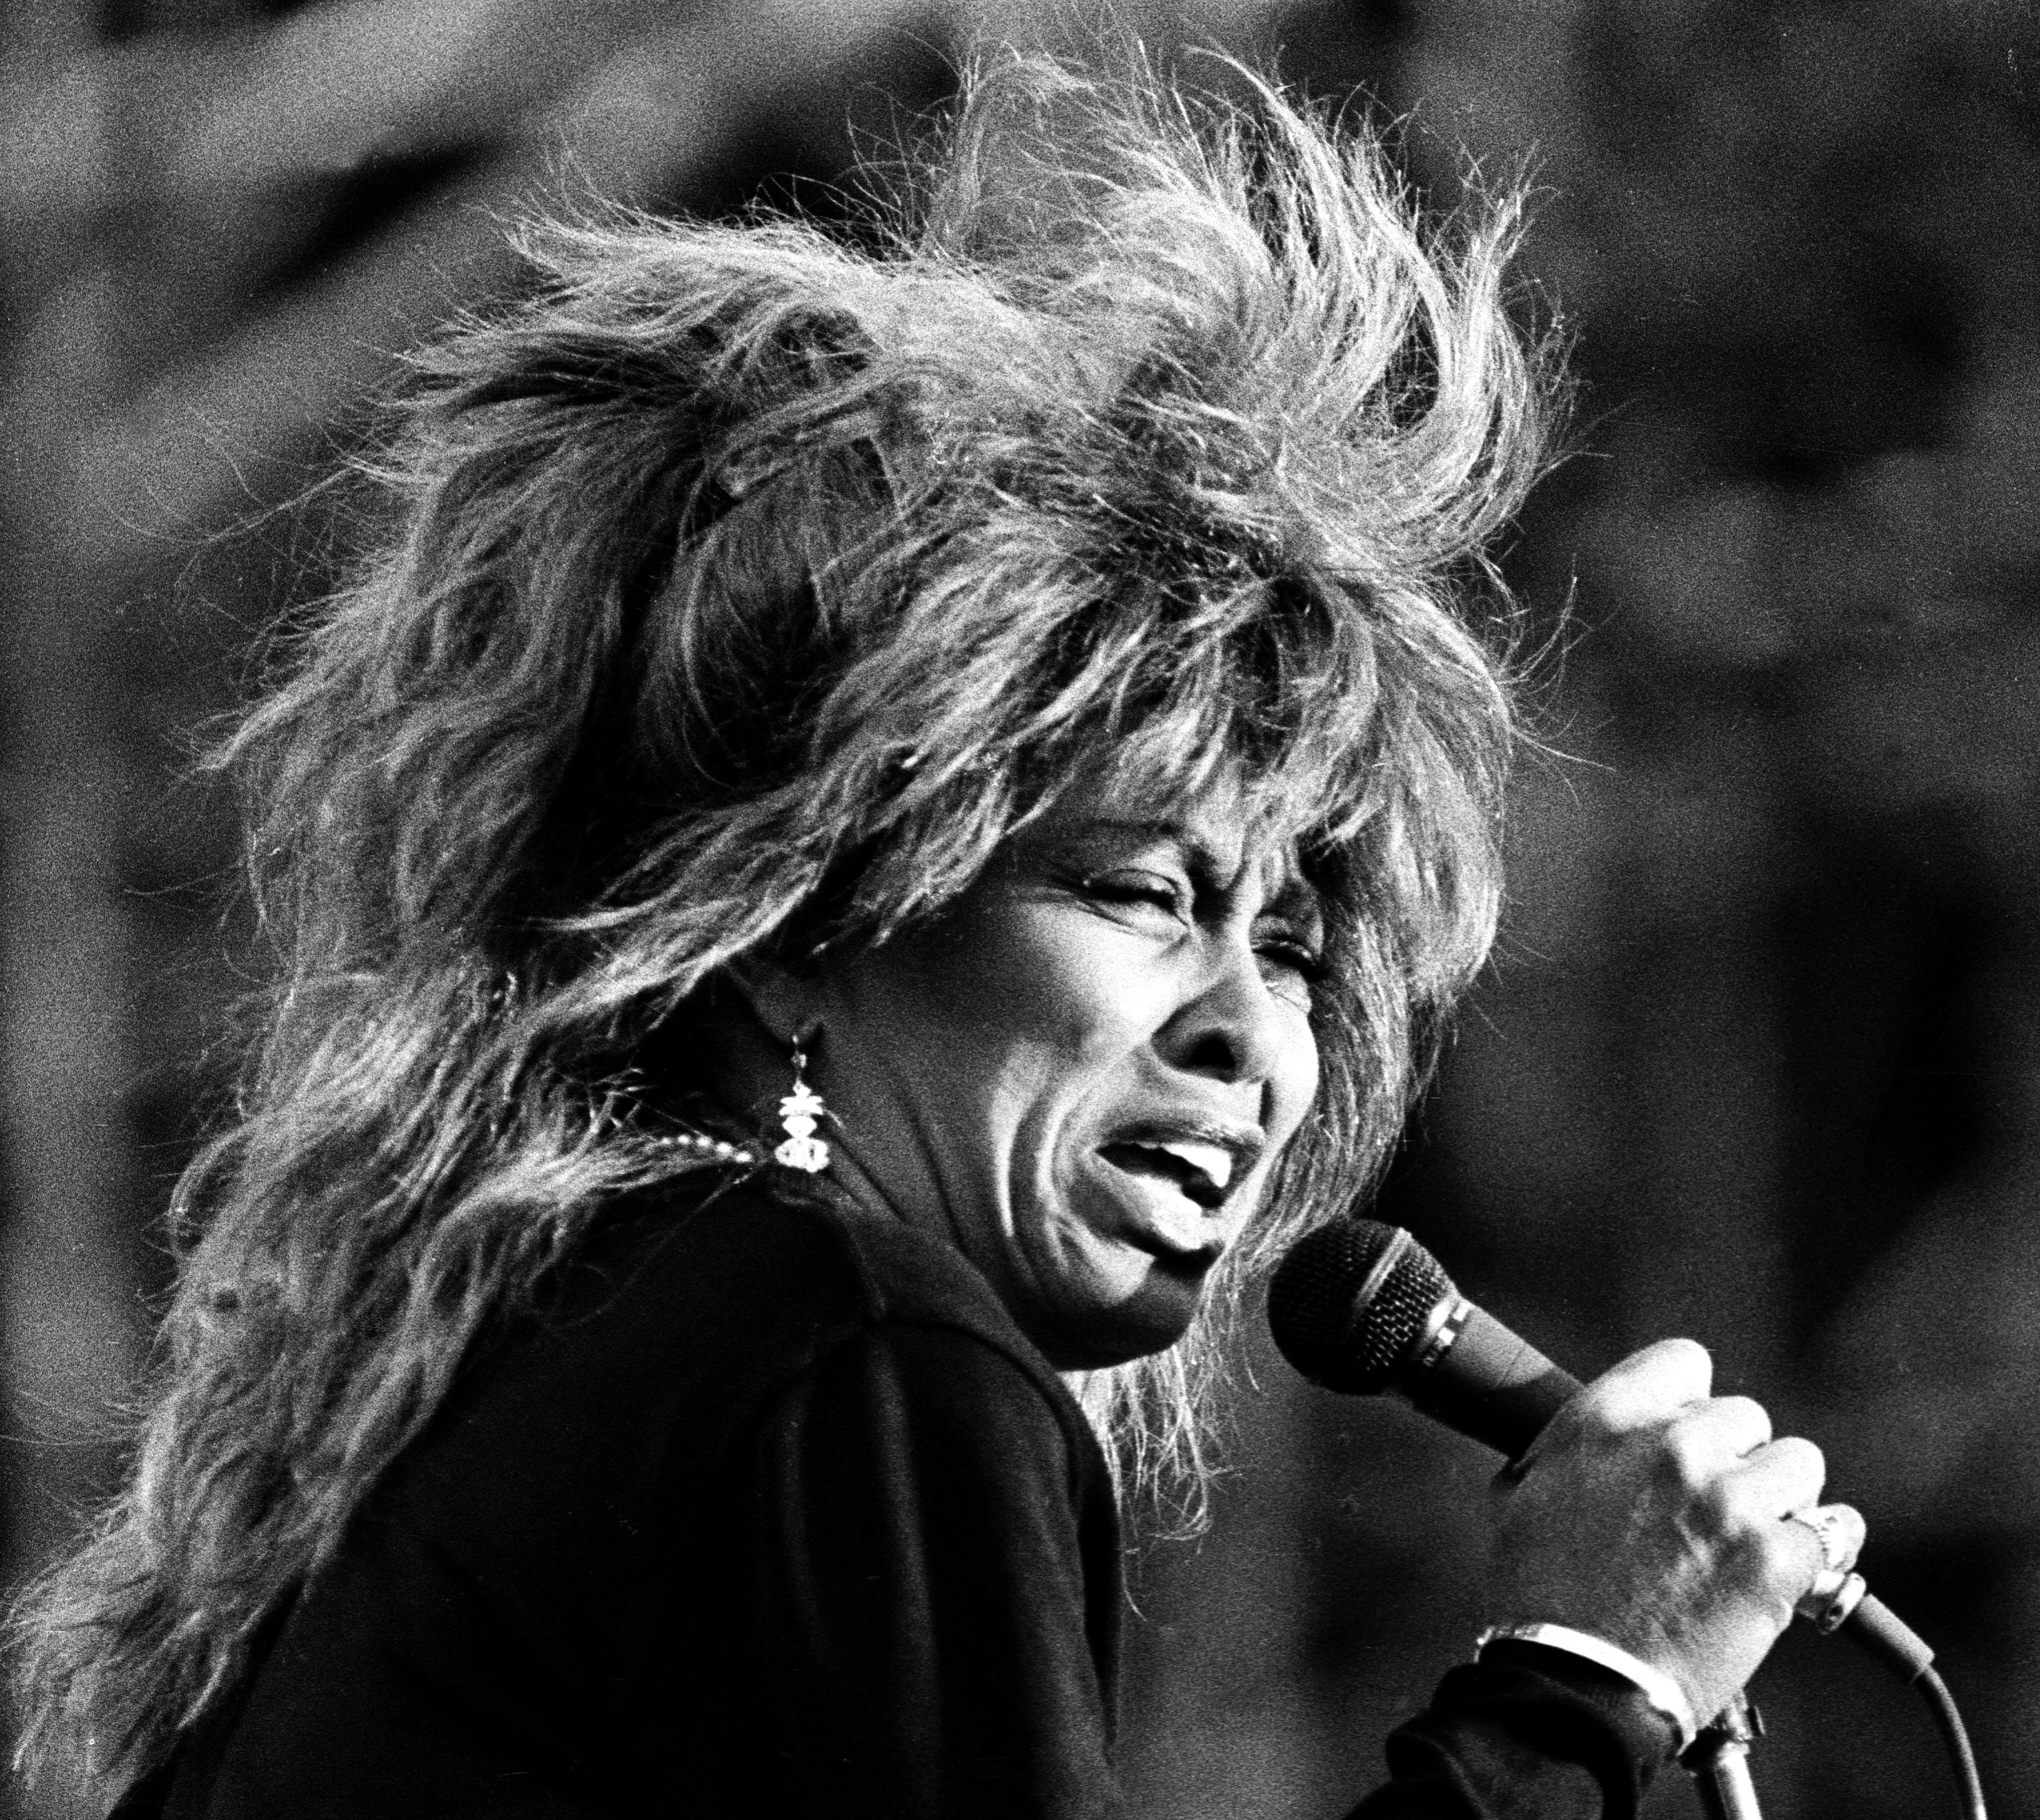 Tina Turner performs during her world tour 87 at the summer open air concert in Hamburg